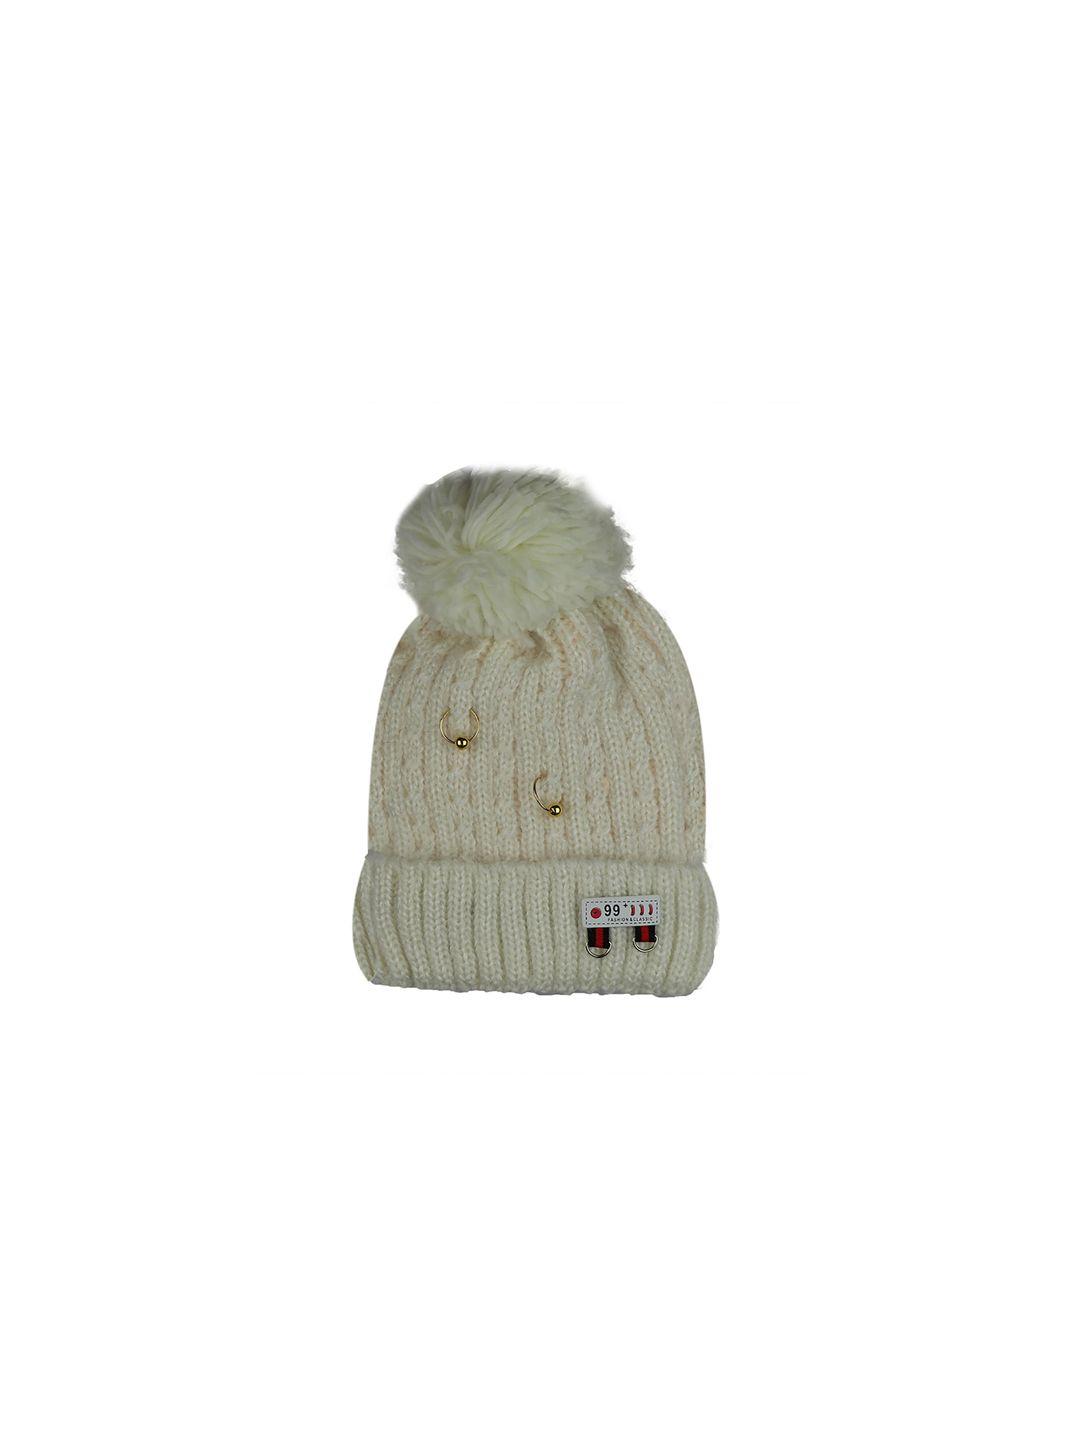 isweven unisex off-white self design beanie